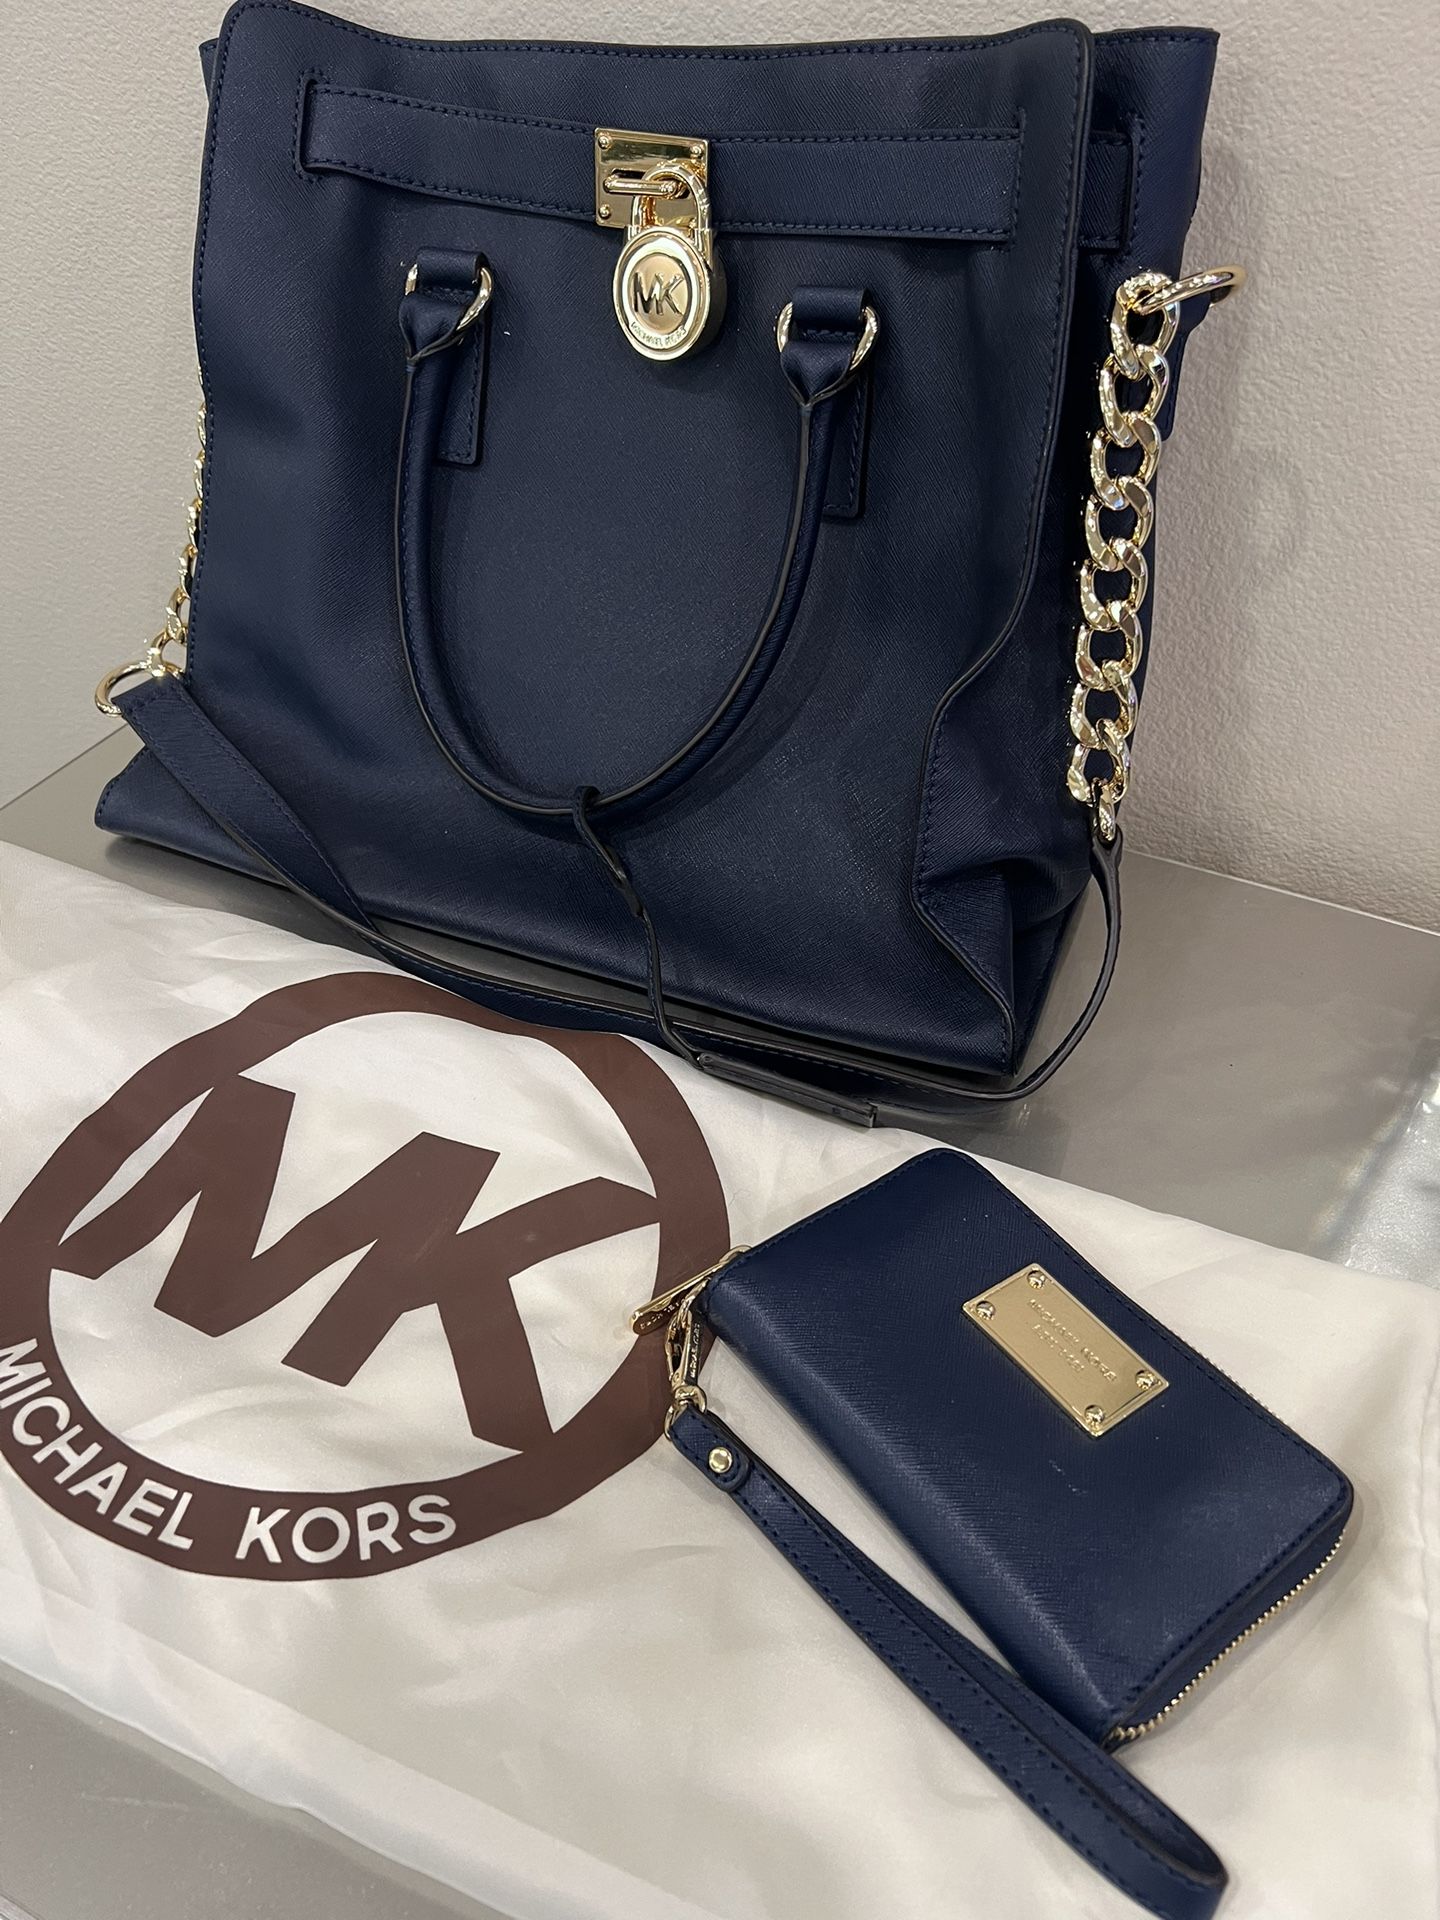 Michael Kors Bag With Matching Wallet